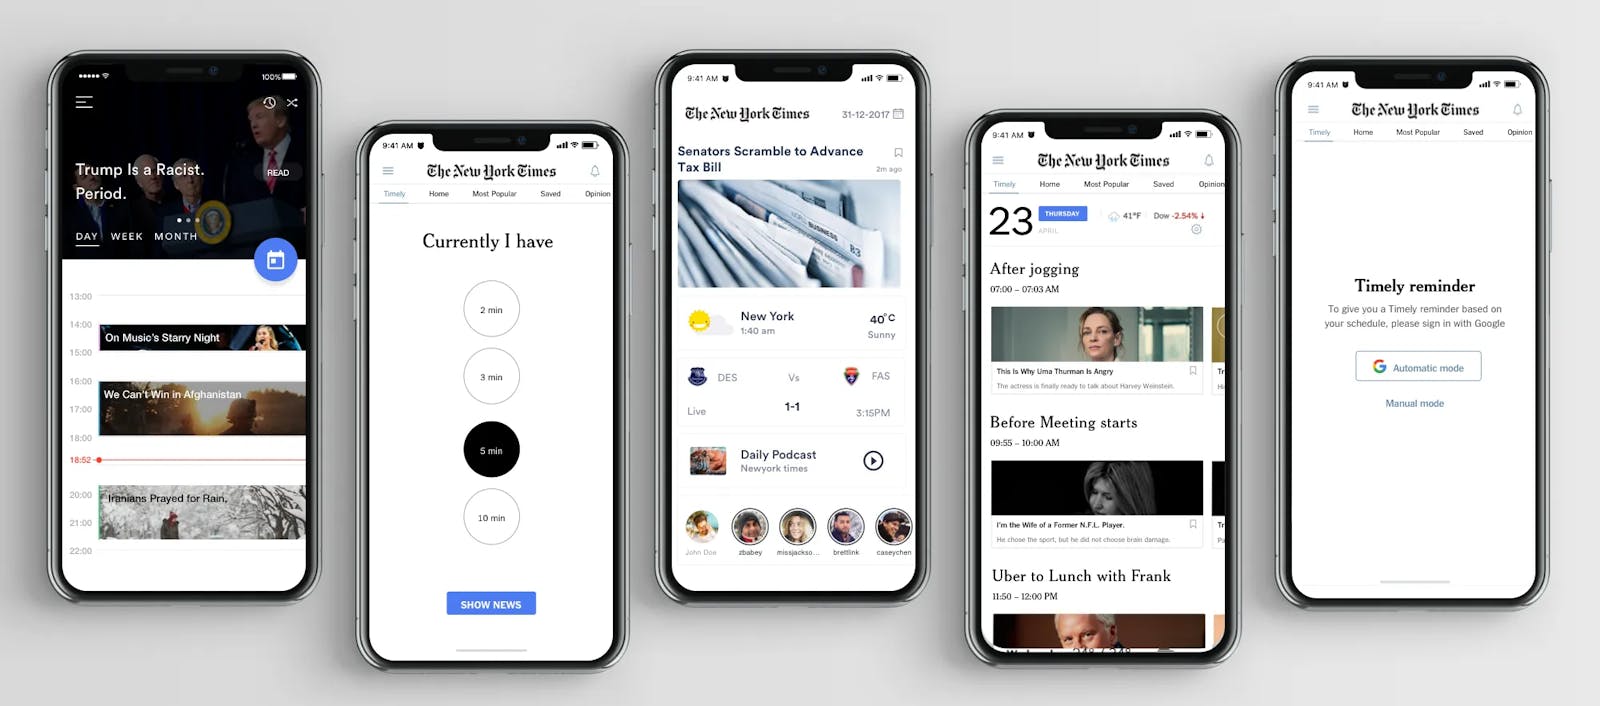 Lessons from a Case Study: Redesigning the New York Times App